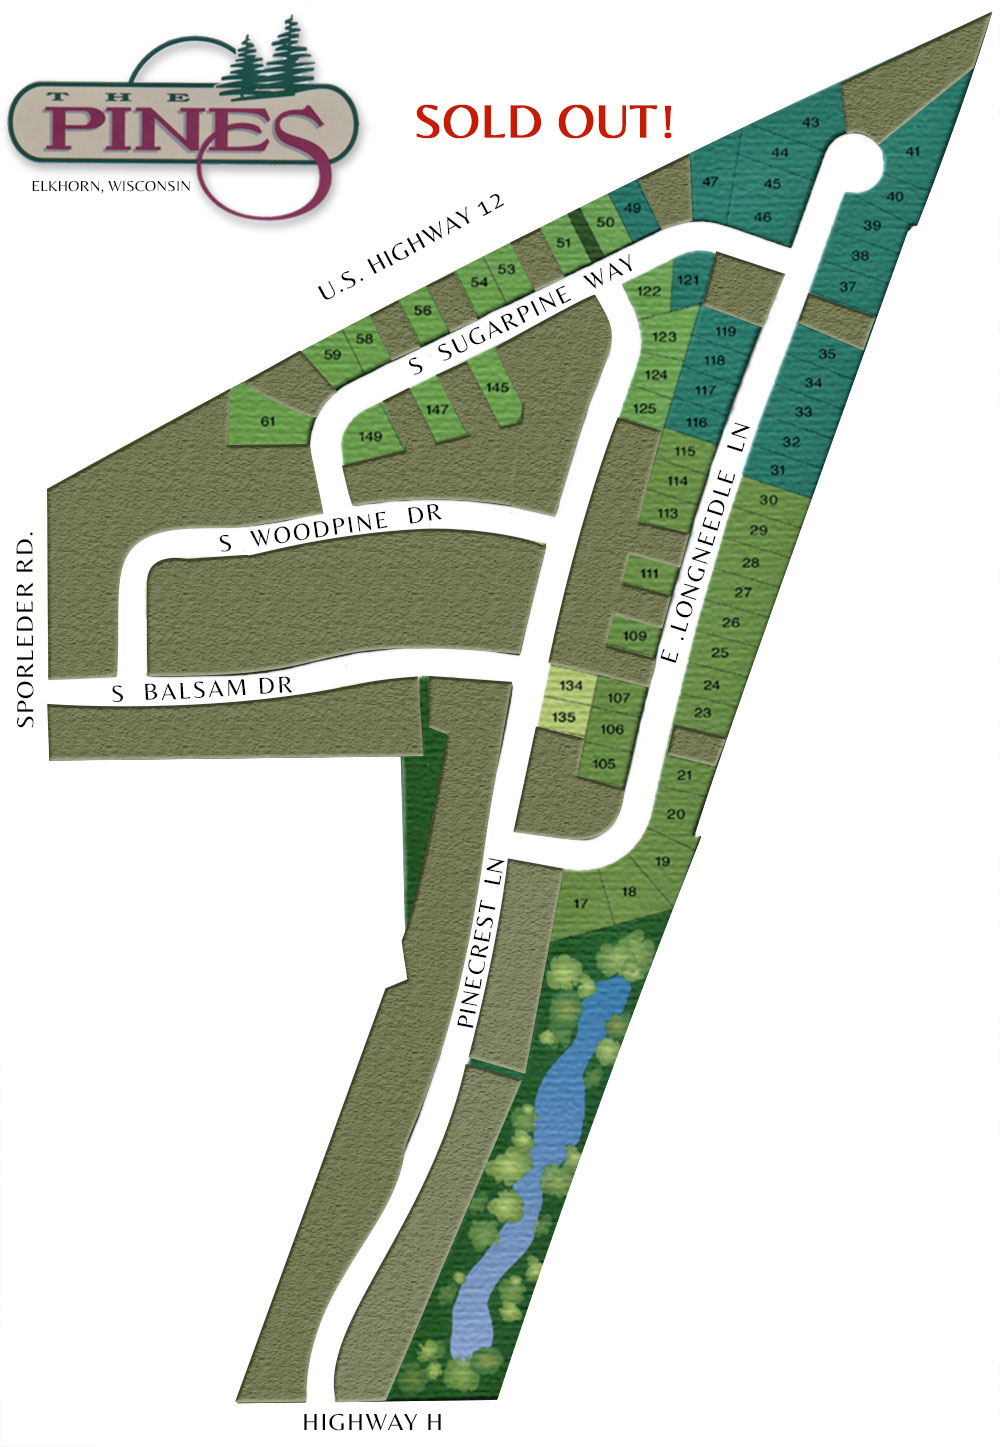 The Pines of Elkhorn Site Map